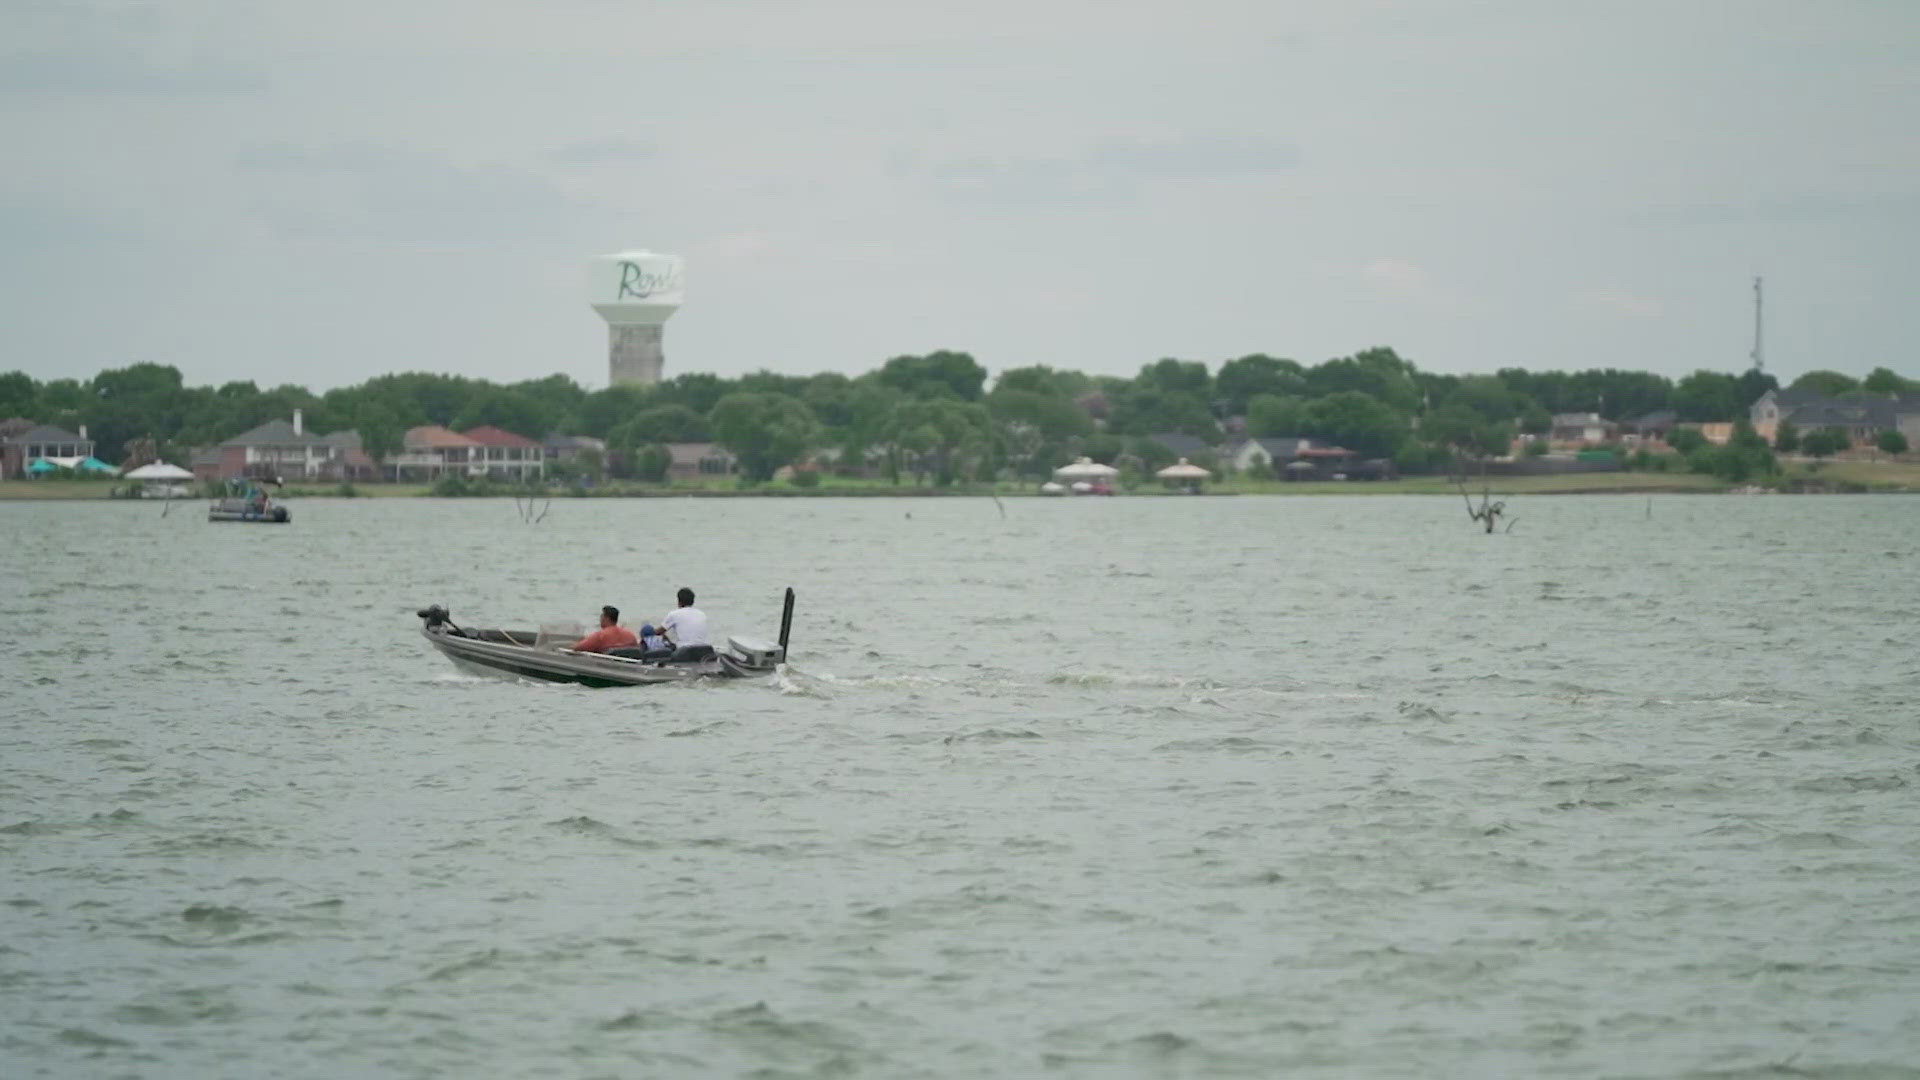 After resuming their search Friday morning, Dallas Fire-Rescue said crews found bodies in Lake Ray Hubbard after two swimmers jumped into the lake from a boat.